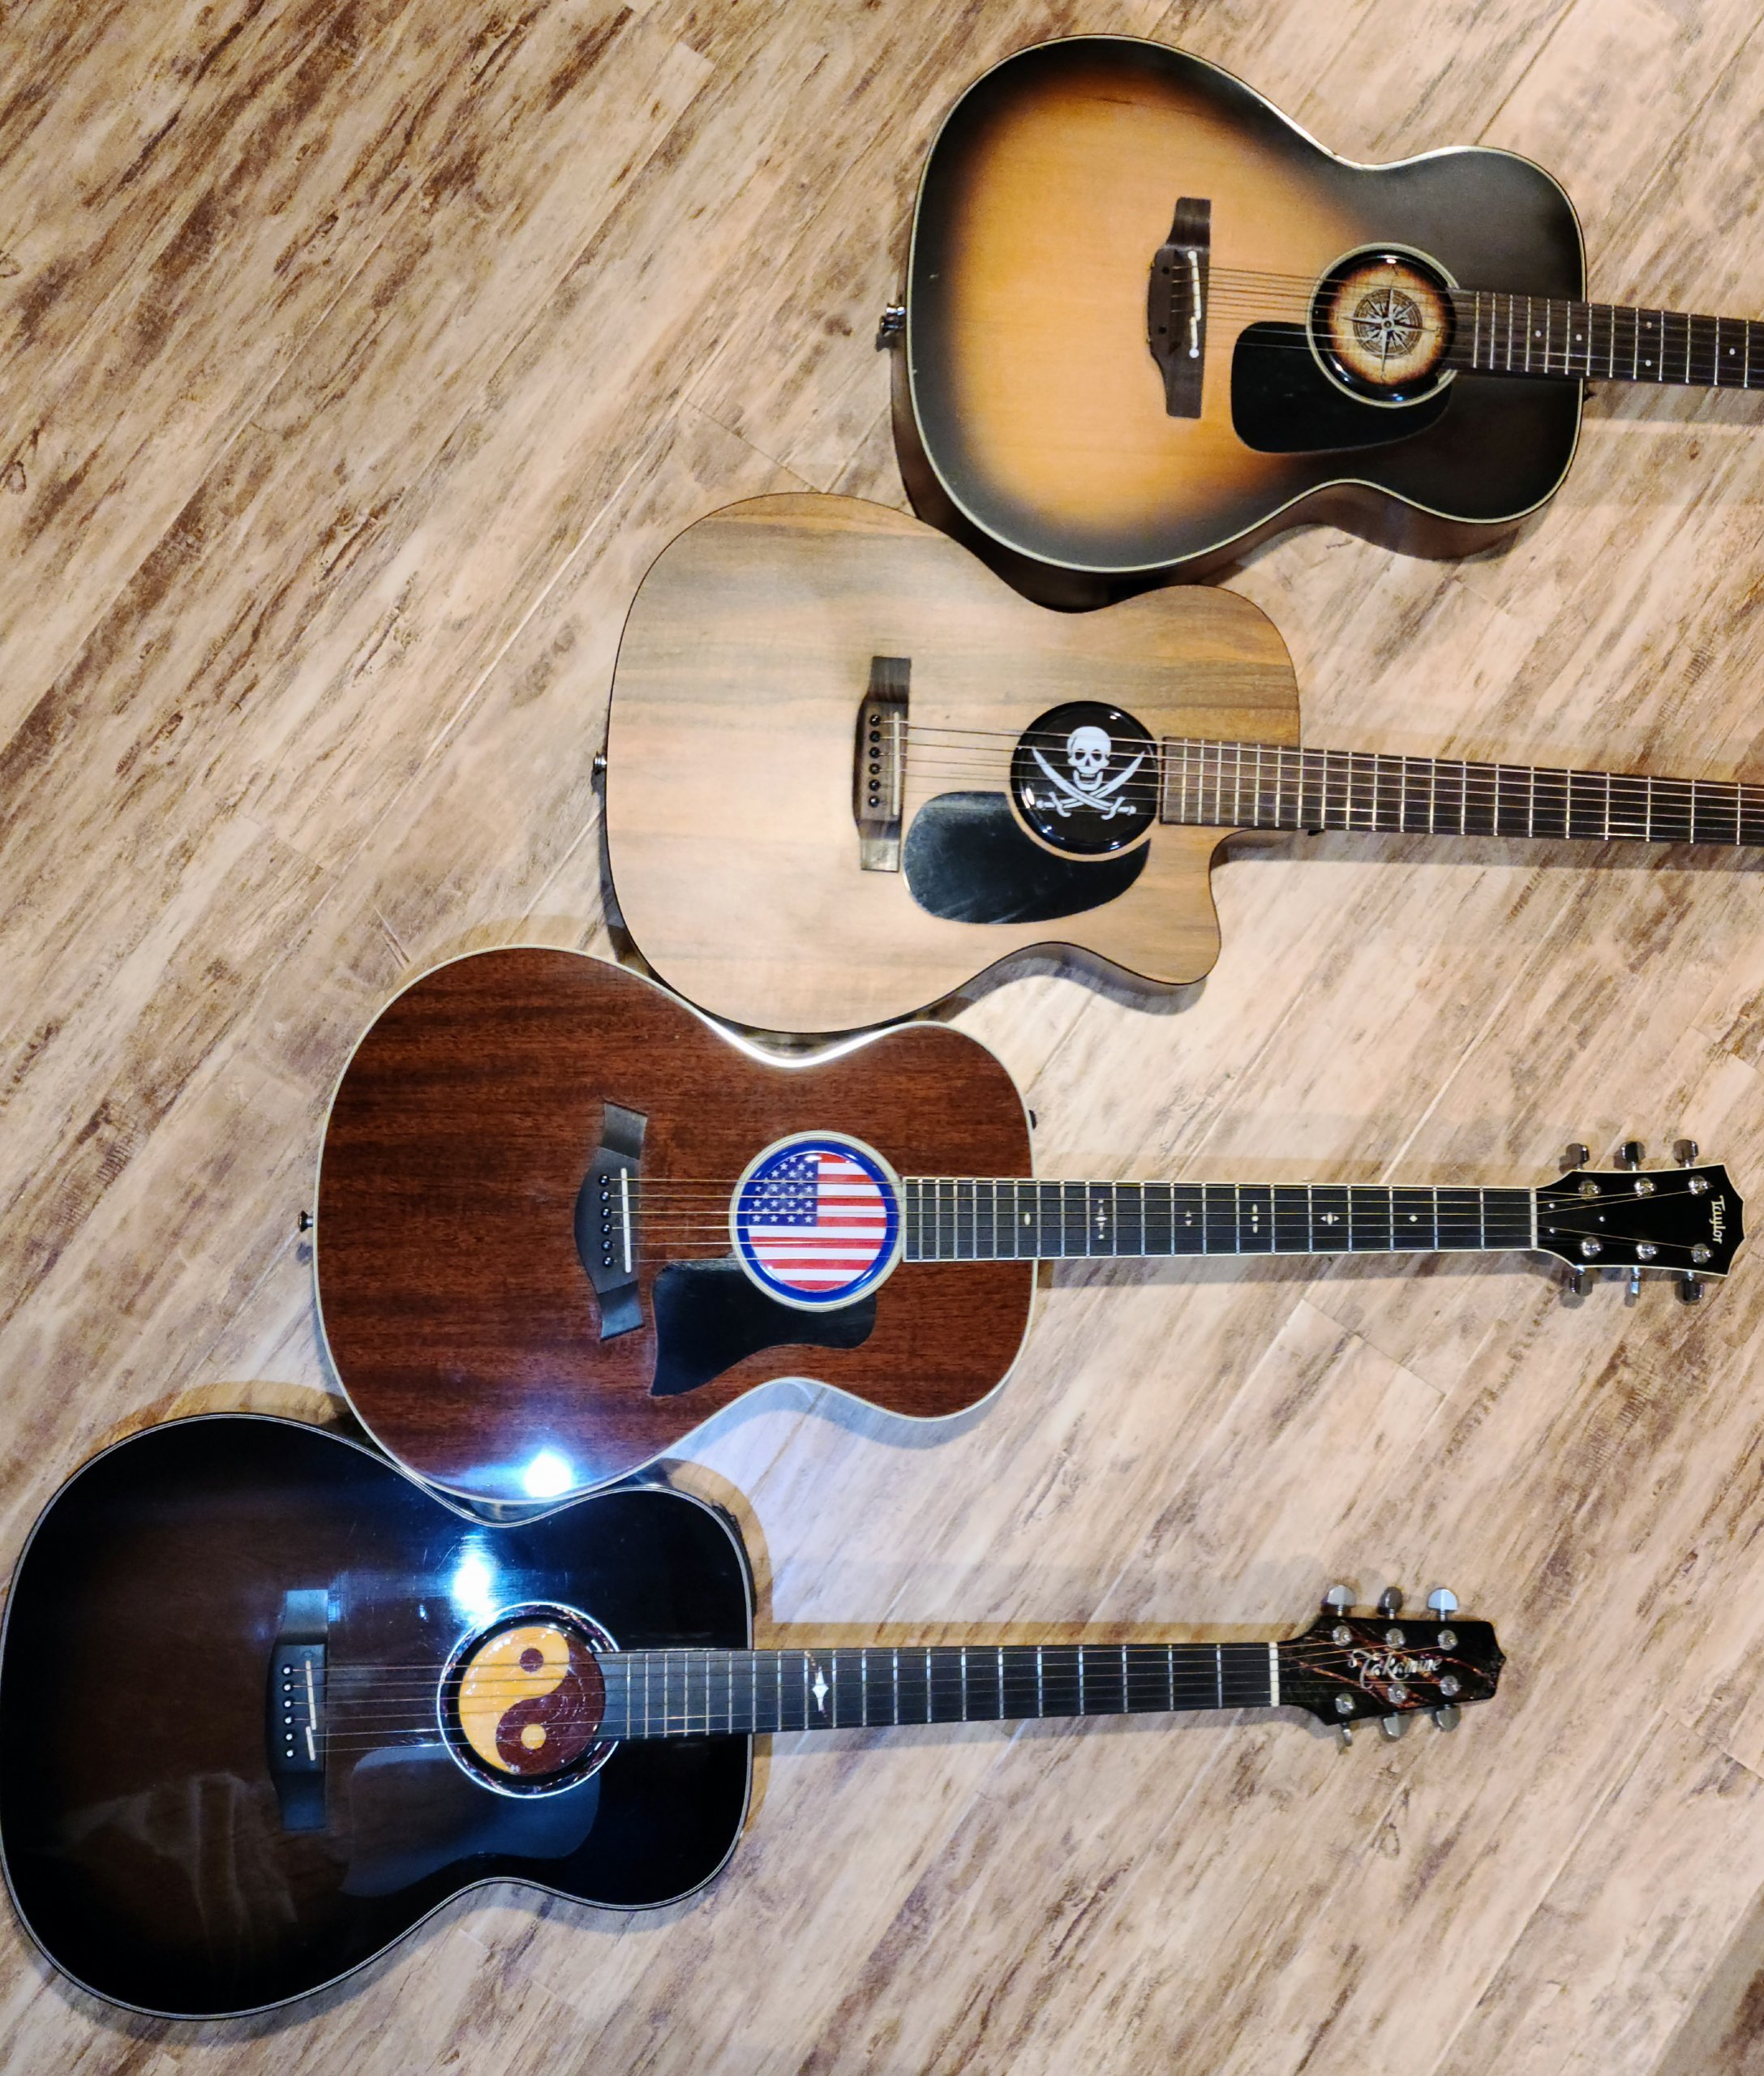 Custom soundhole covers for guitars